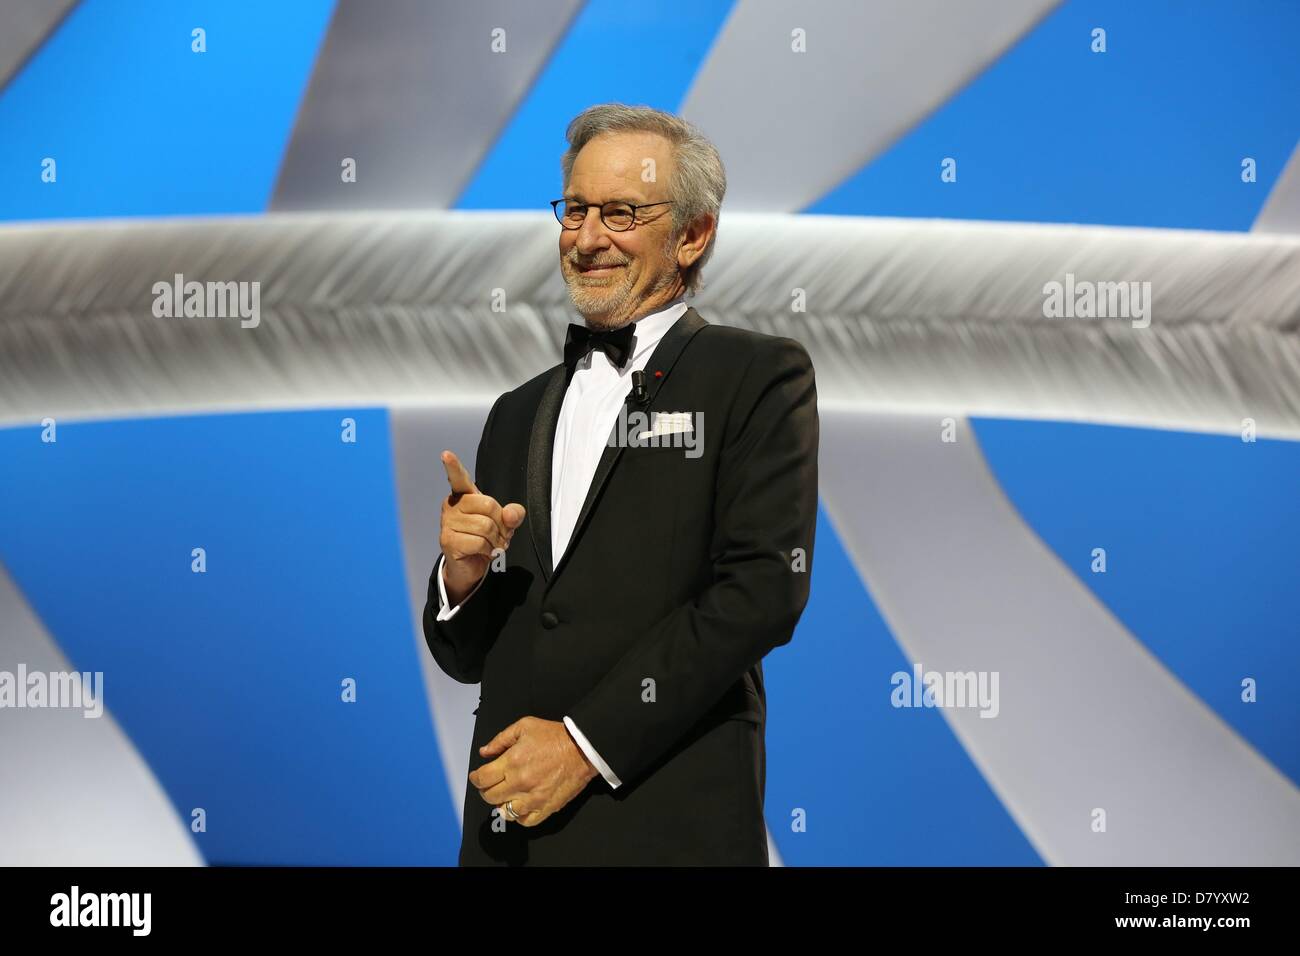 Cannes, France, 15 May 2013. Director and jury president Steven Spielberg attends the opening ceremony of the 66th International Cannes Film Festival at Palais des Festivals in Cannes, France, on 15 May 2013. Photo: Hubert Boesl/DPA/Alamy Live News Stock Photo